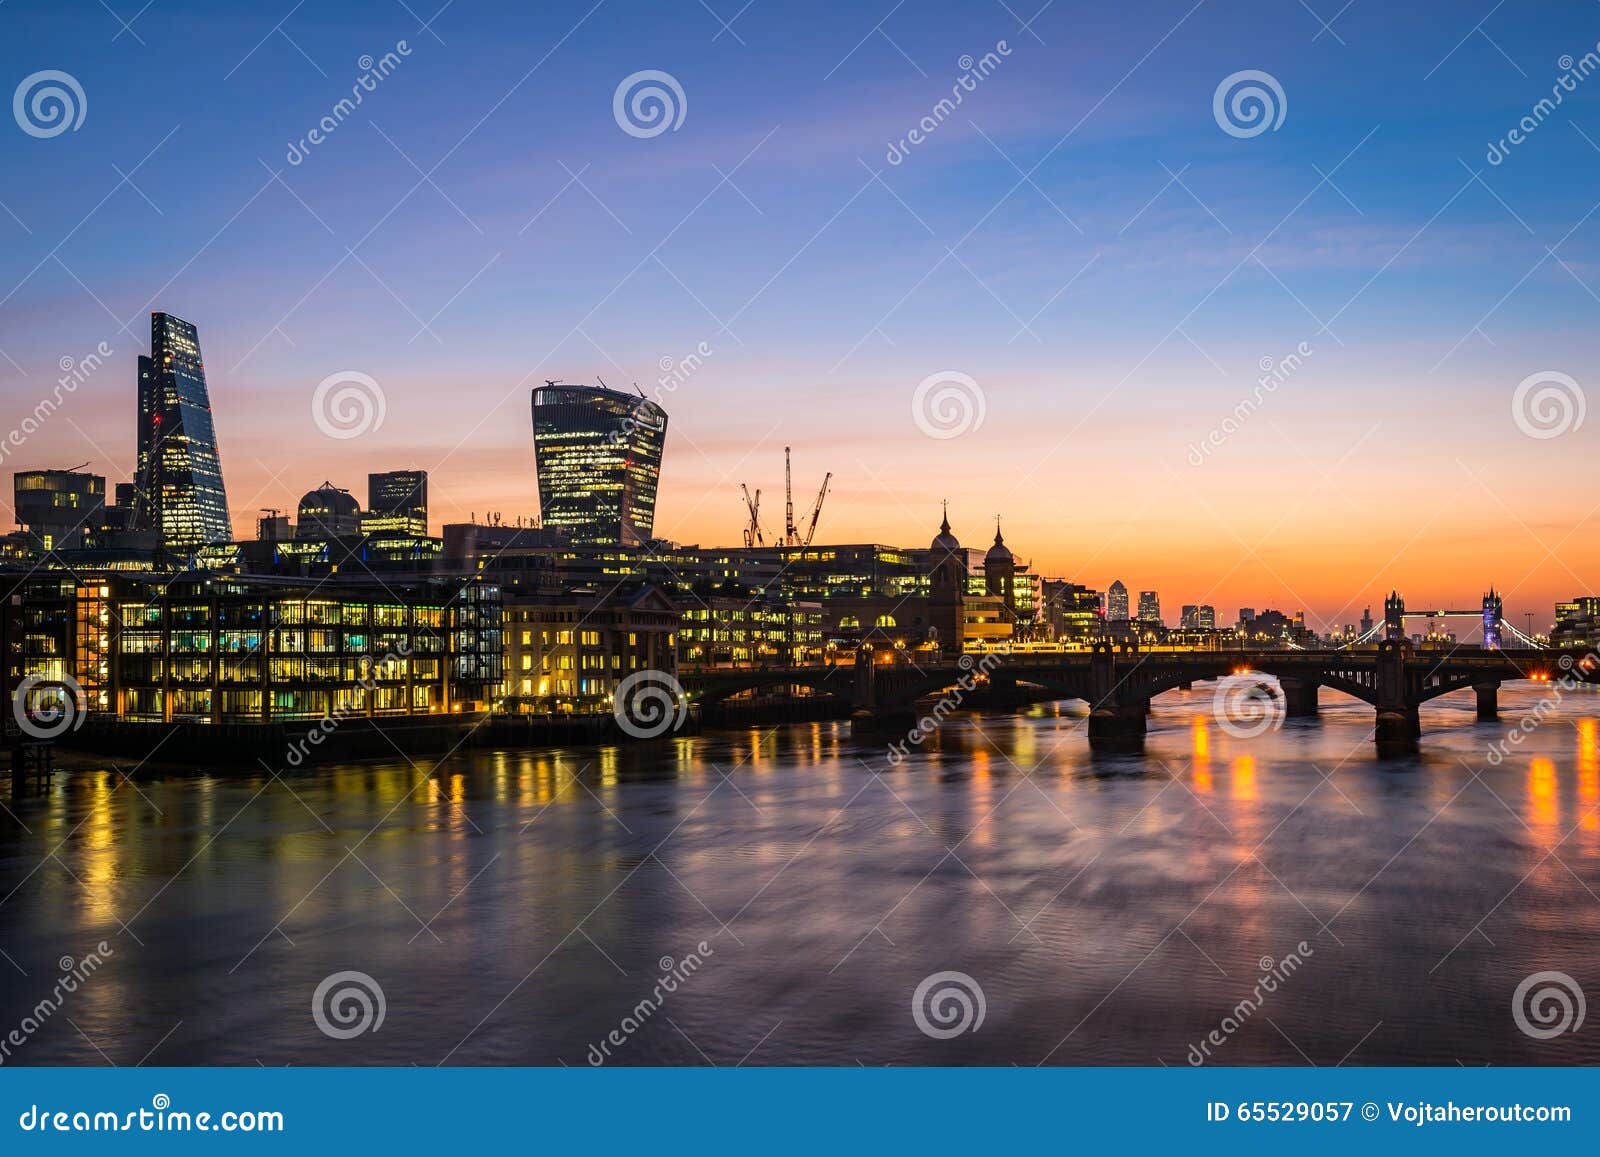 modern london, morning photo with offices by the river thames